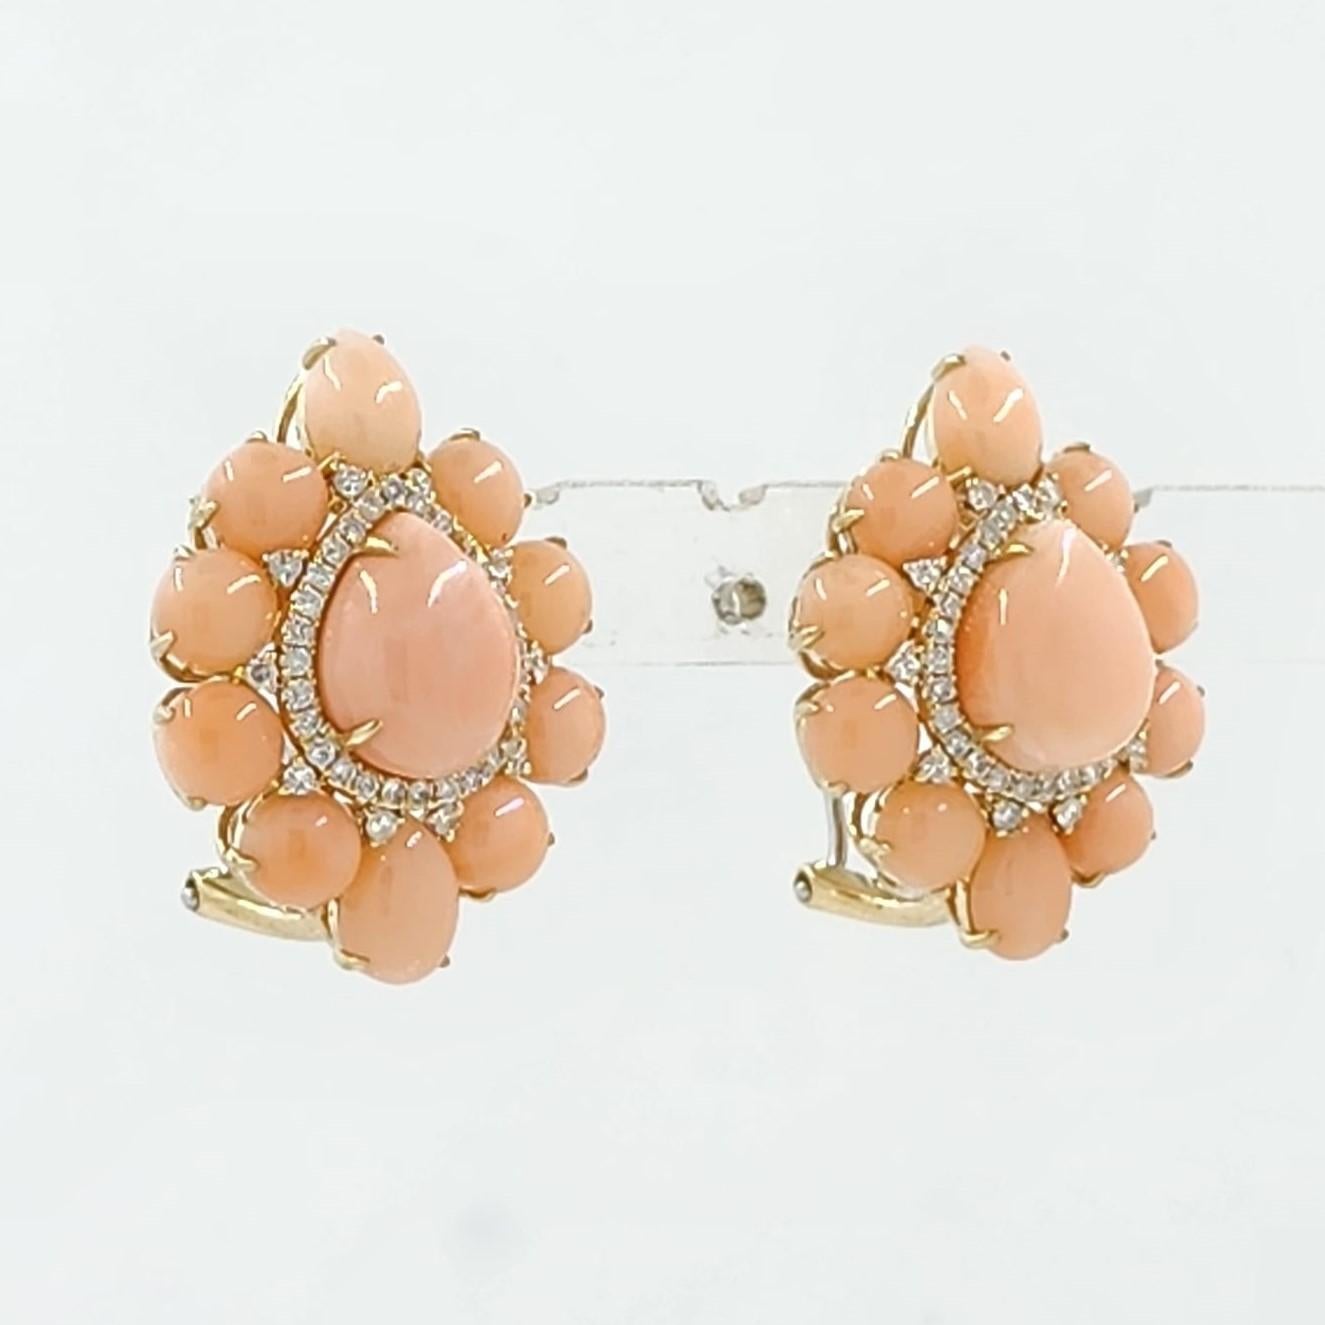 Step into the realm of classic elegance with these exquisite vintage angel skin coral earrings, lovingly crafted in radiant 18 karat rose gold.

At the centerpiece of each earring, a delicate pear-cut angel skin coral beckons with its soft, ethereal